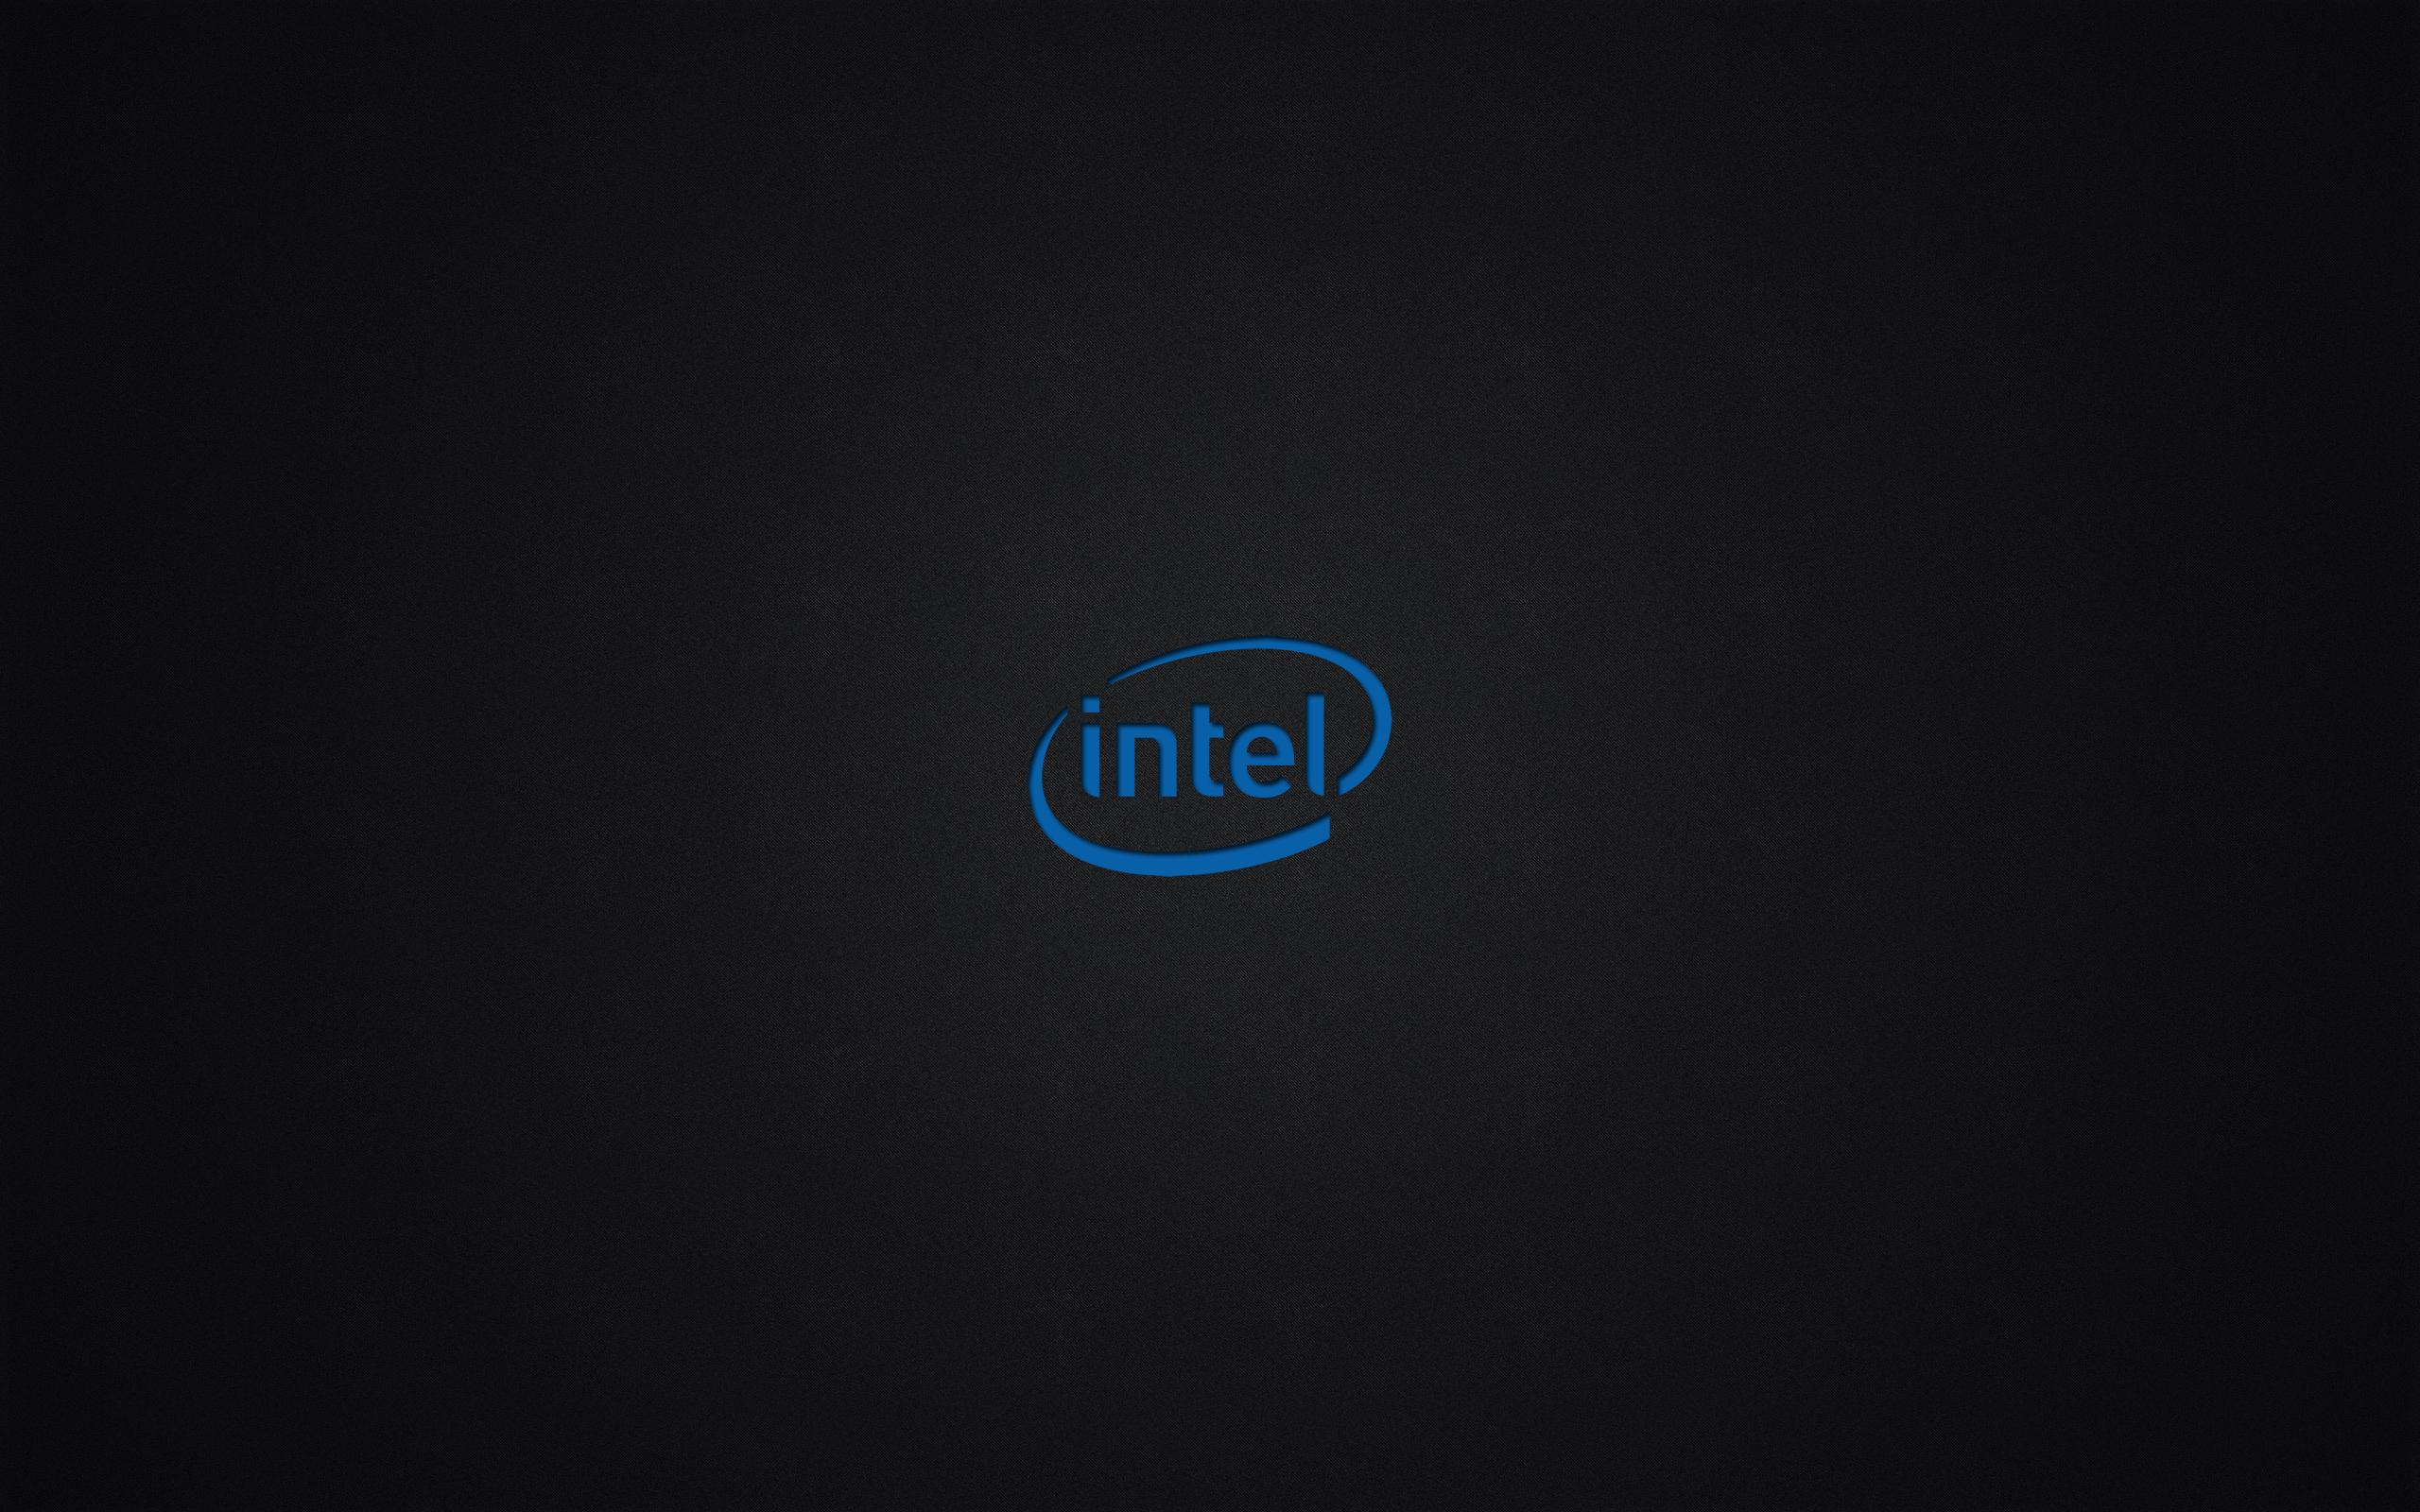 Intel Core I5 Wallpapers  Top Free Intel Core I5 Backgrounds   WallpaperAccess